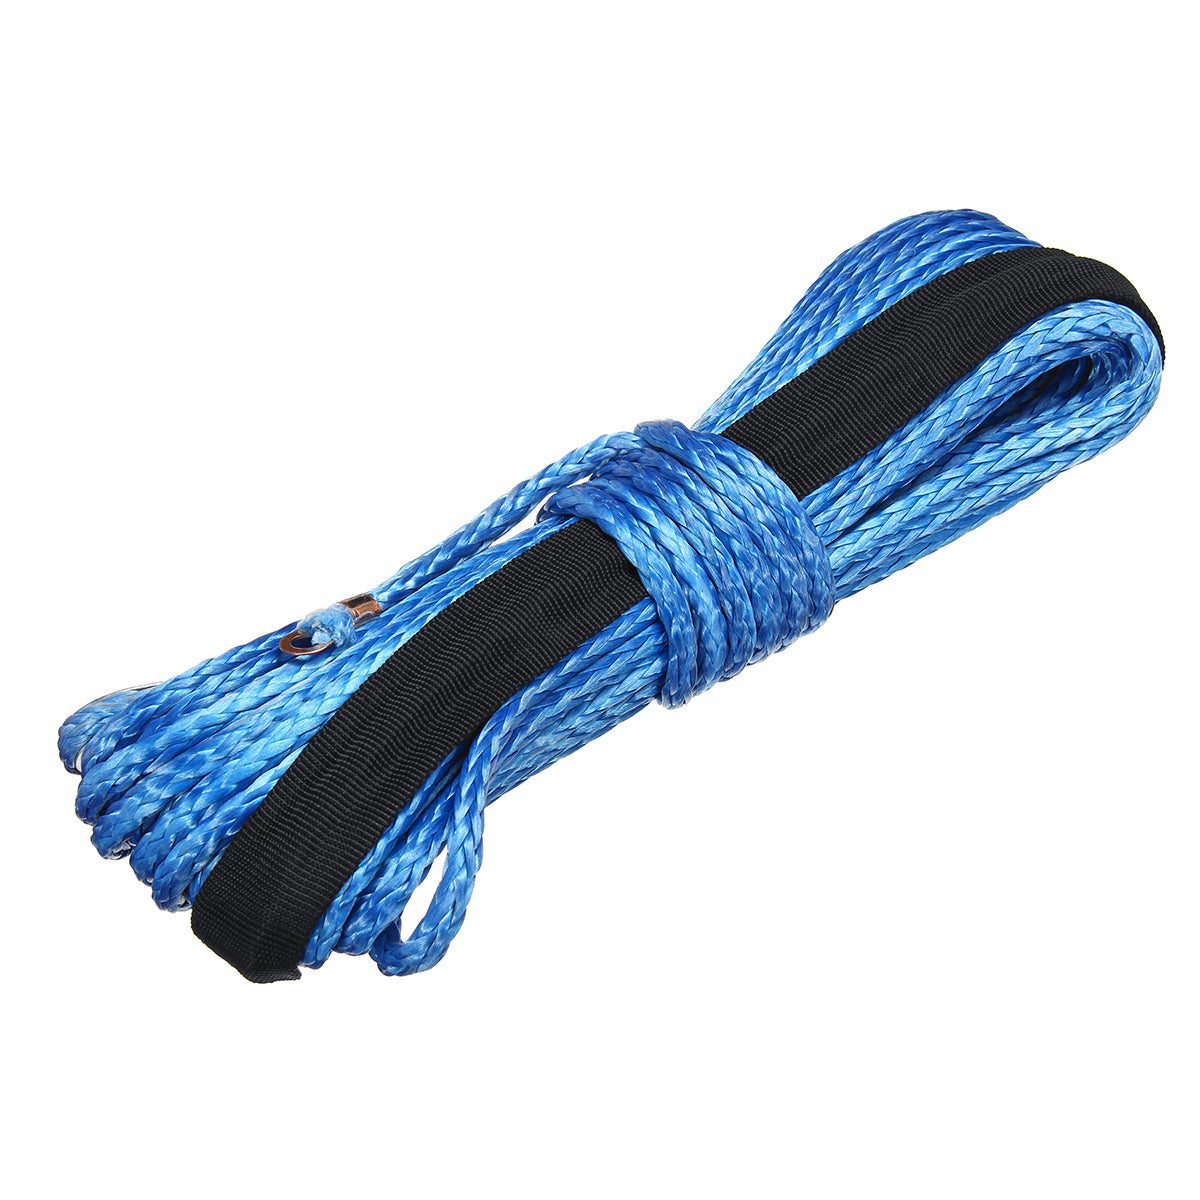 Steel Blue 15m 5500LBs Winch Rope String Line Cable With Sheath Synthetic Towing Rope Car Wash Maintenance String For ATV UTV Off-Road Motorcycle